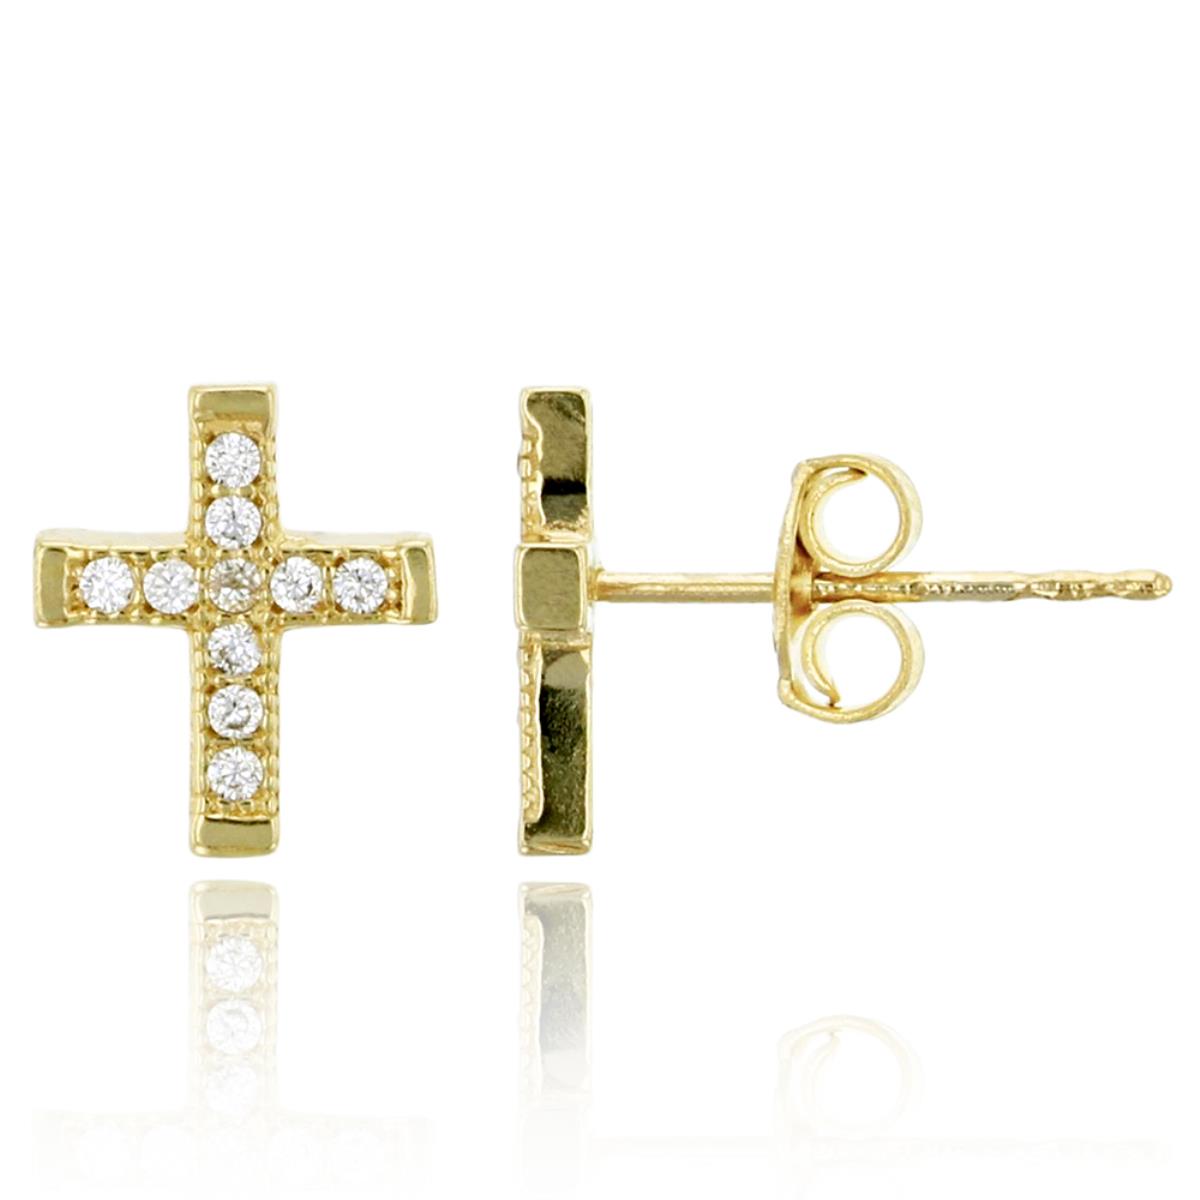 14K Yellow Gold Micropave 7.30x8.50mm Cross Stud Earrings with Push Backs